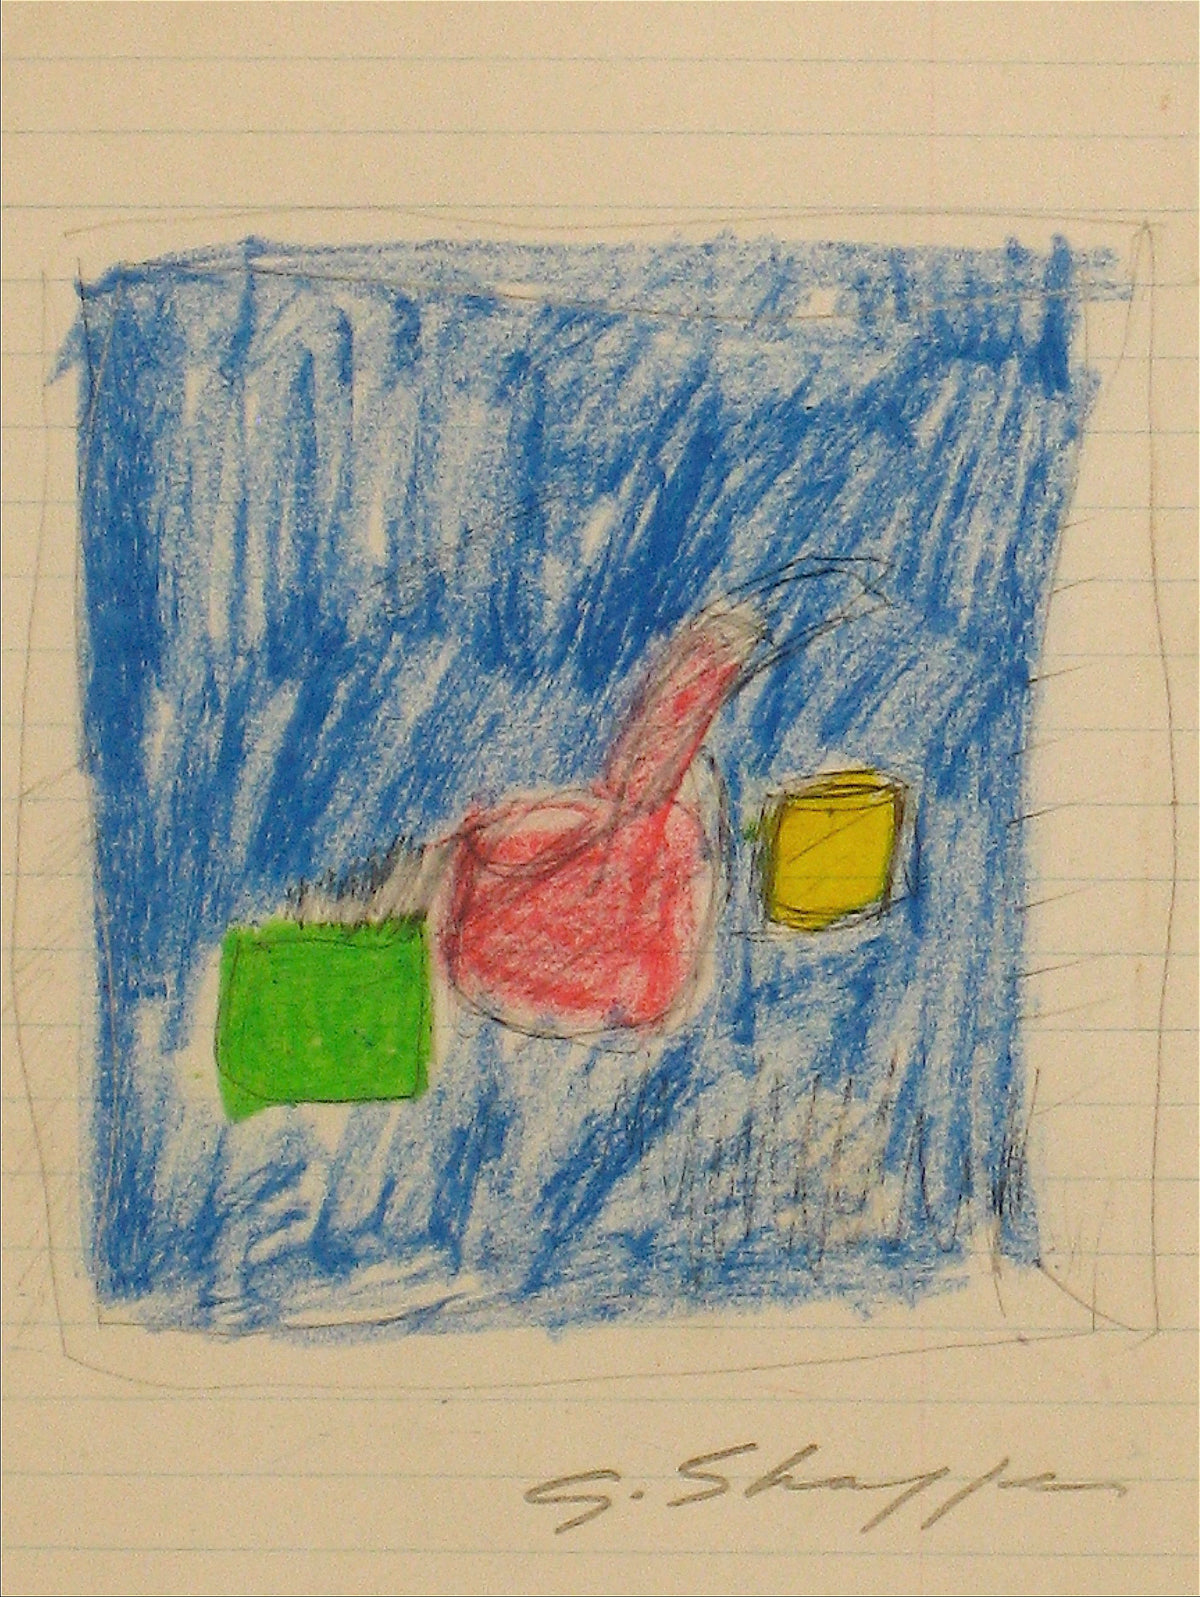 Abstracted Boxes in Yellow, Green &amp; Blue &lt;br&gt;1958 Pastel &lt;br&gt;&lt;br&gt;#8273